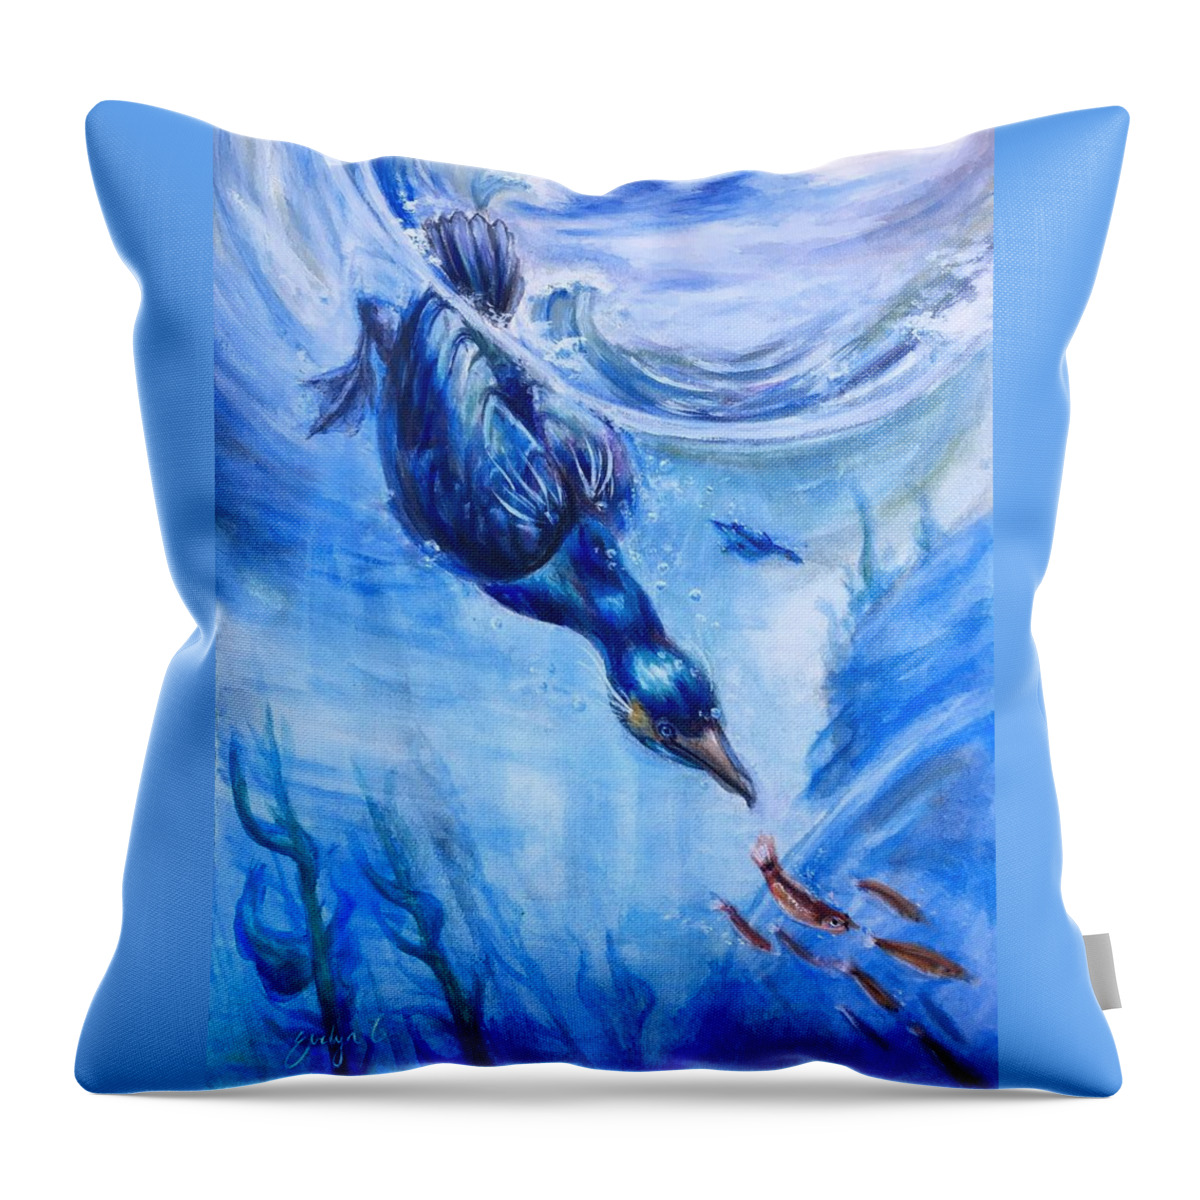 Brandts Cormorant Throw Pillow featuring the painting Dive-Through Diner by Evelyn Chuang 9th grade by California Coastal Commission